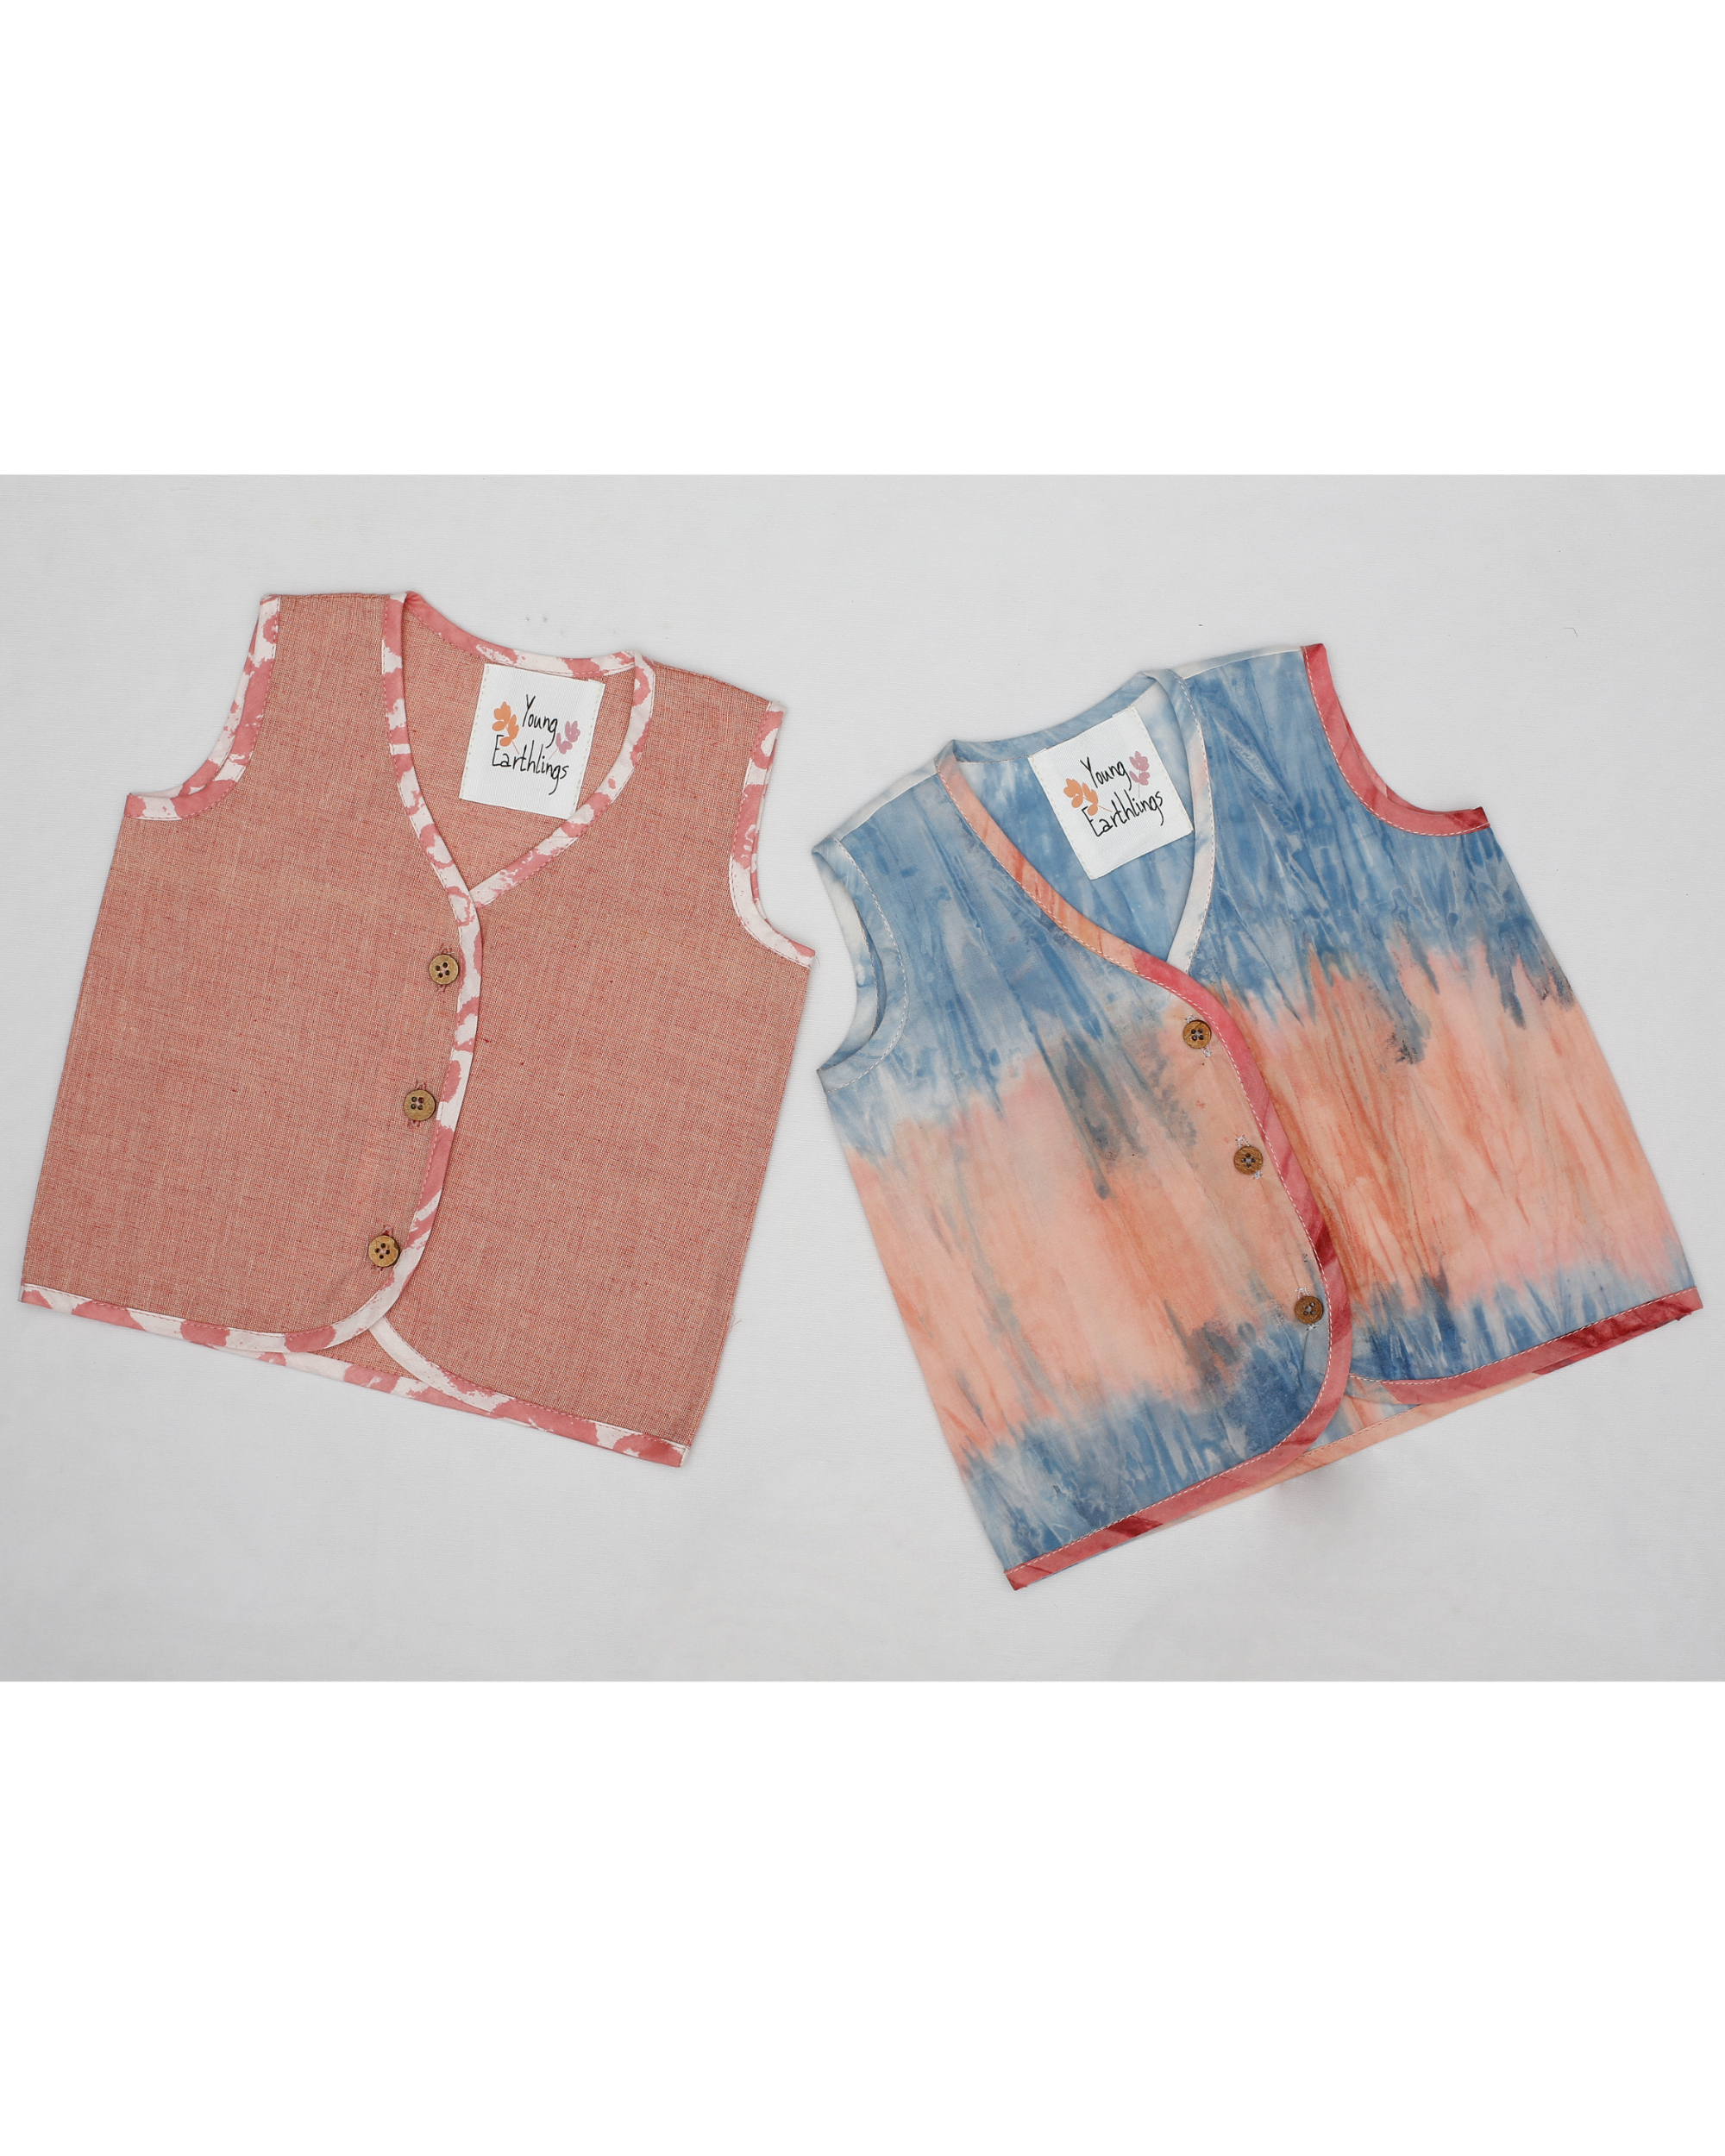 Rose pink and peach ombre jhabla - set of two